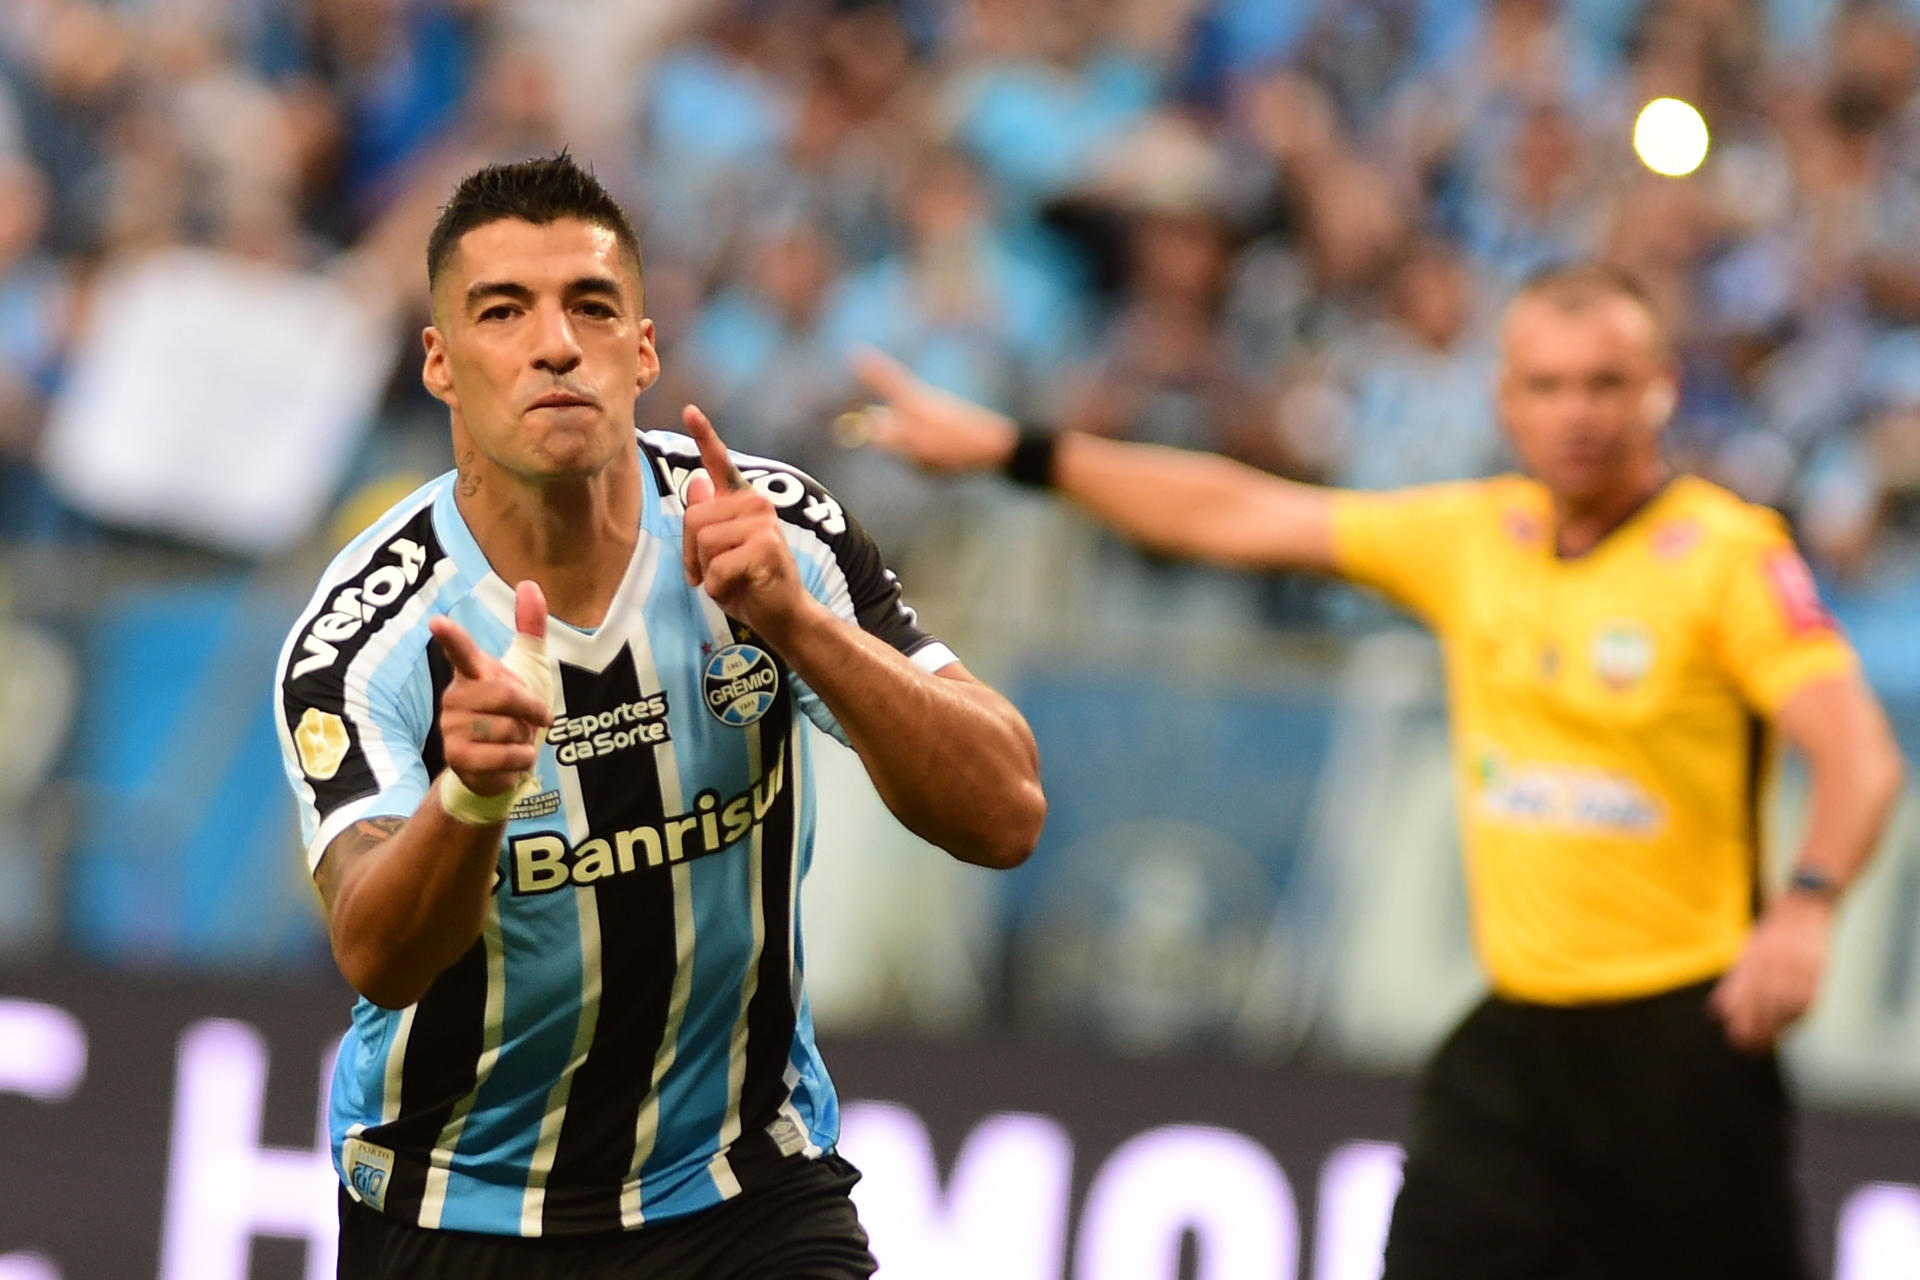 Vitor Roque: 'I'm like Luis Suarez. I want to play for Barca' - Football